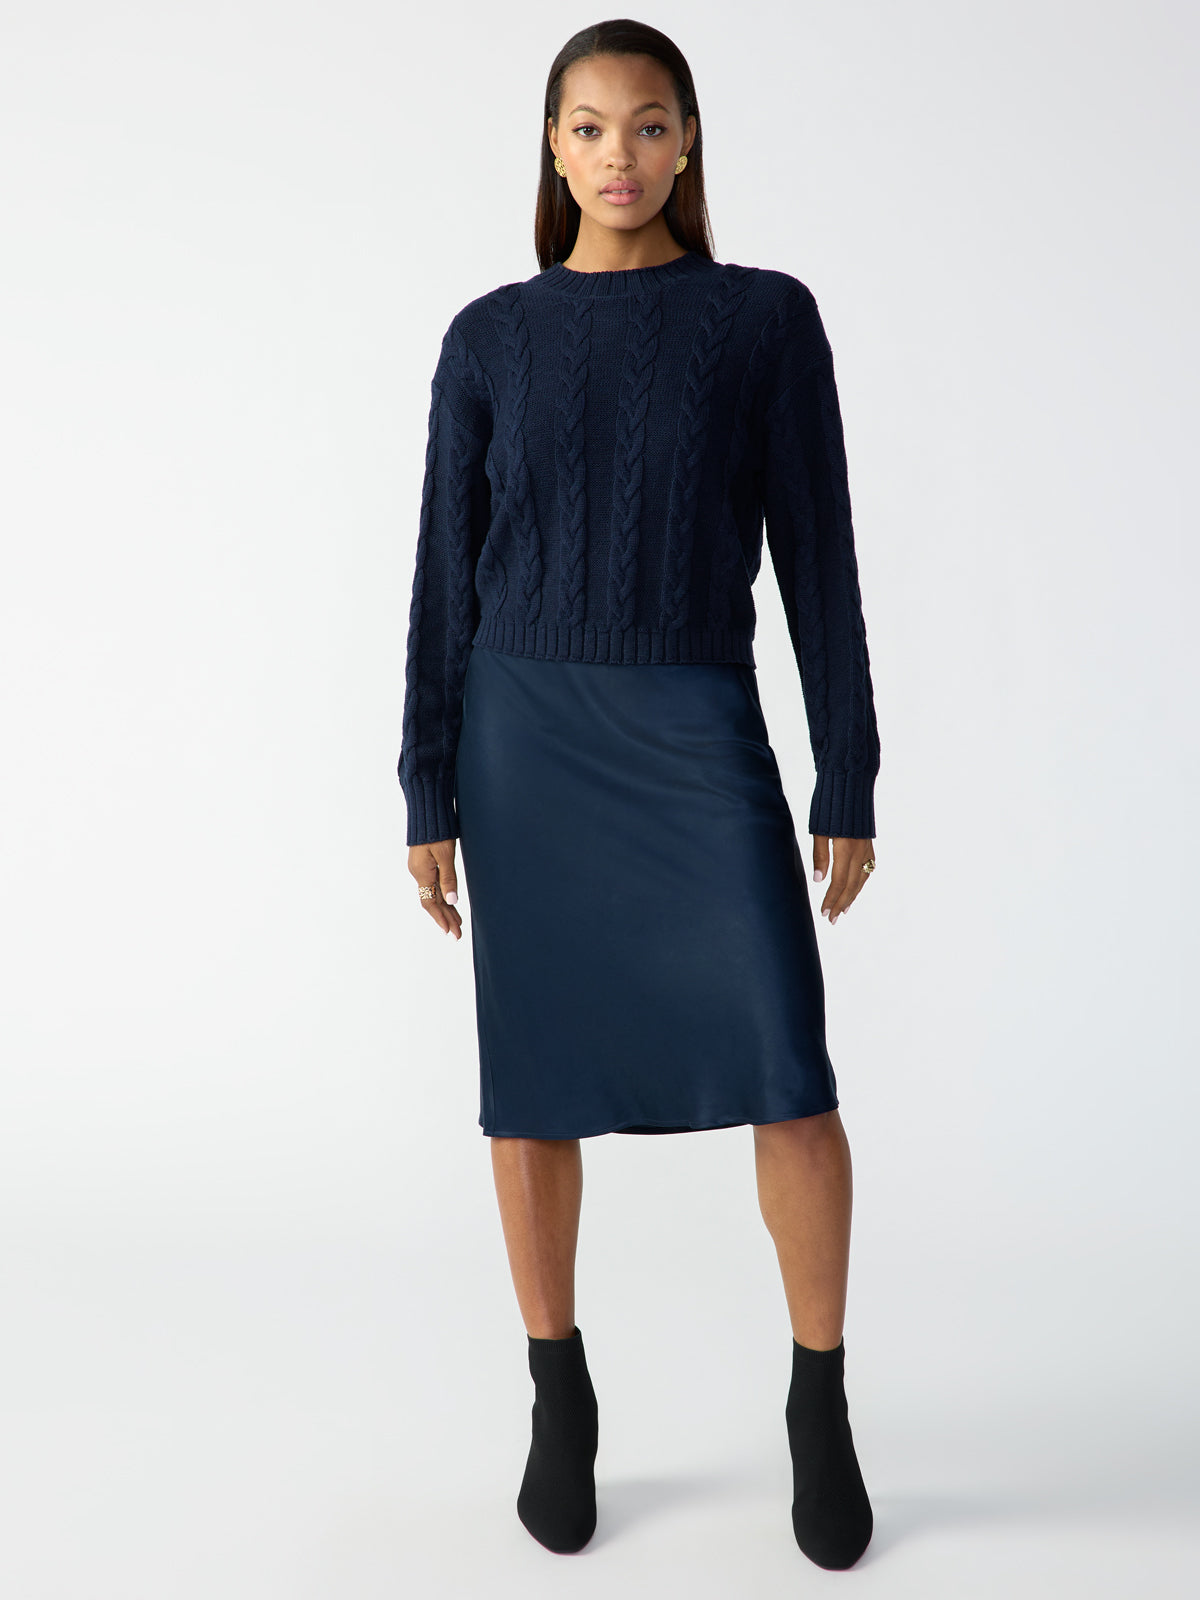 The Cable Sweater Navy Reflection